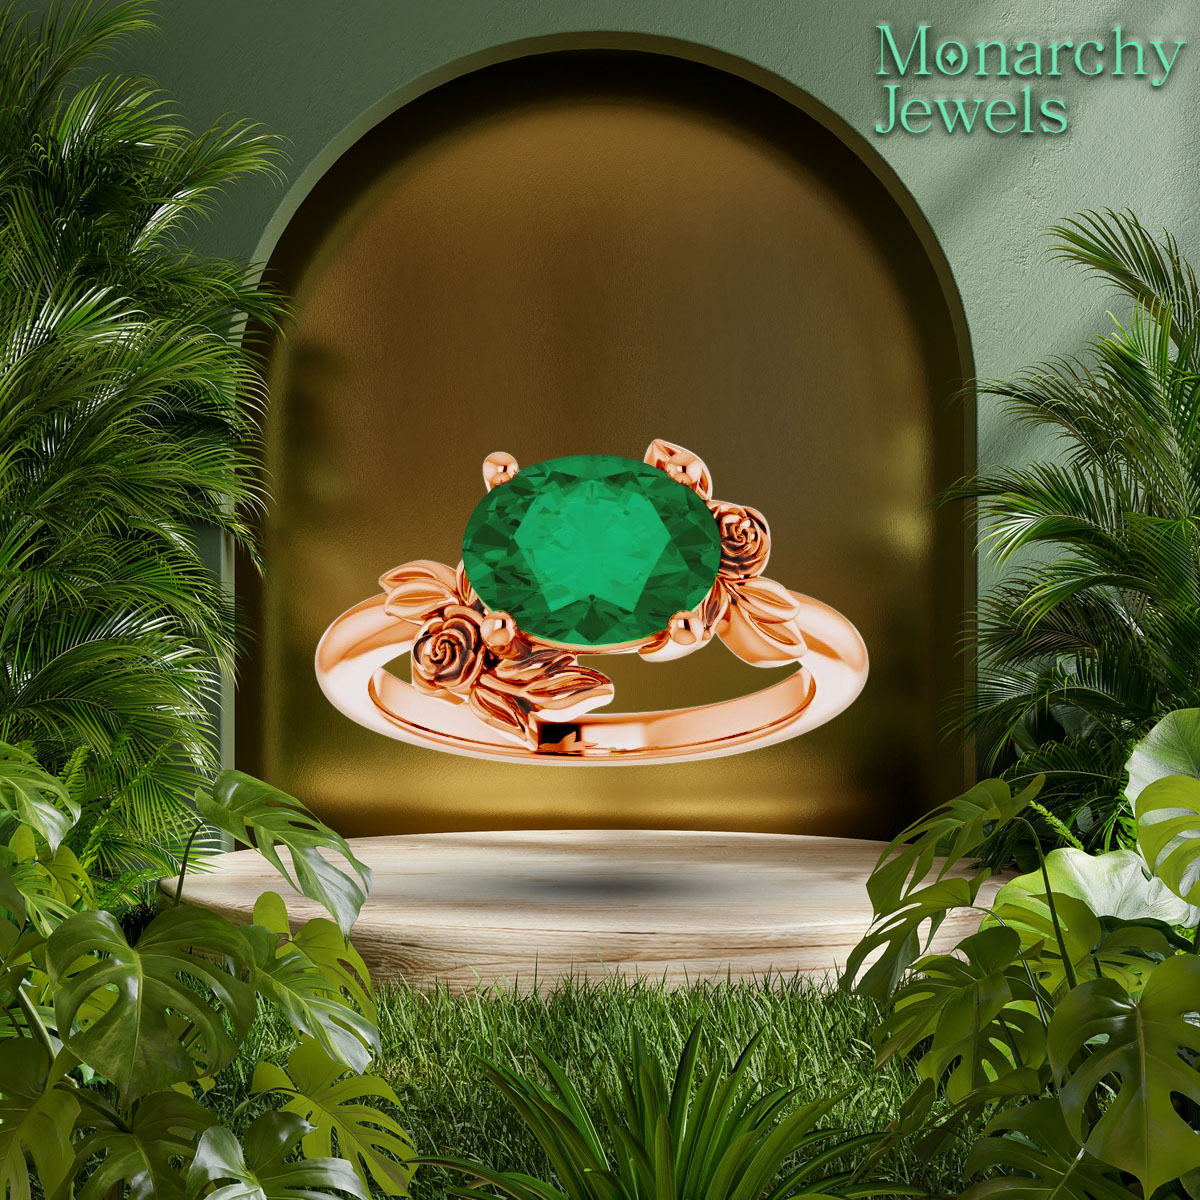 Fall in love with the deep Earthy tones of Emerald this May.
#MonarchyJewels #FallInLove #Emeralds #MayBirthstone #EmeraldJewelry #LuxuryGems